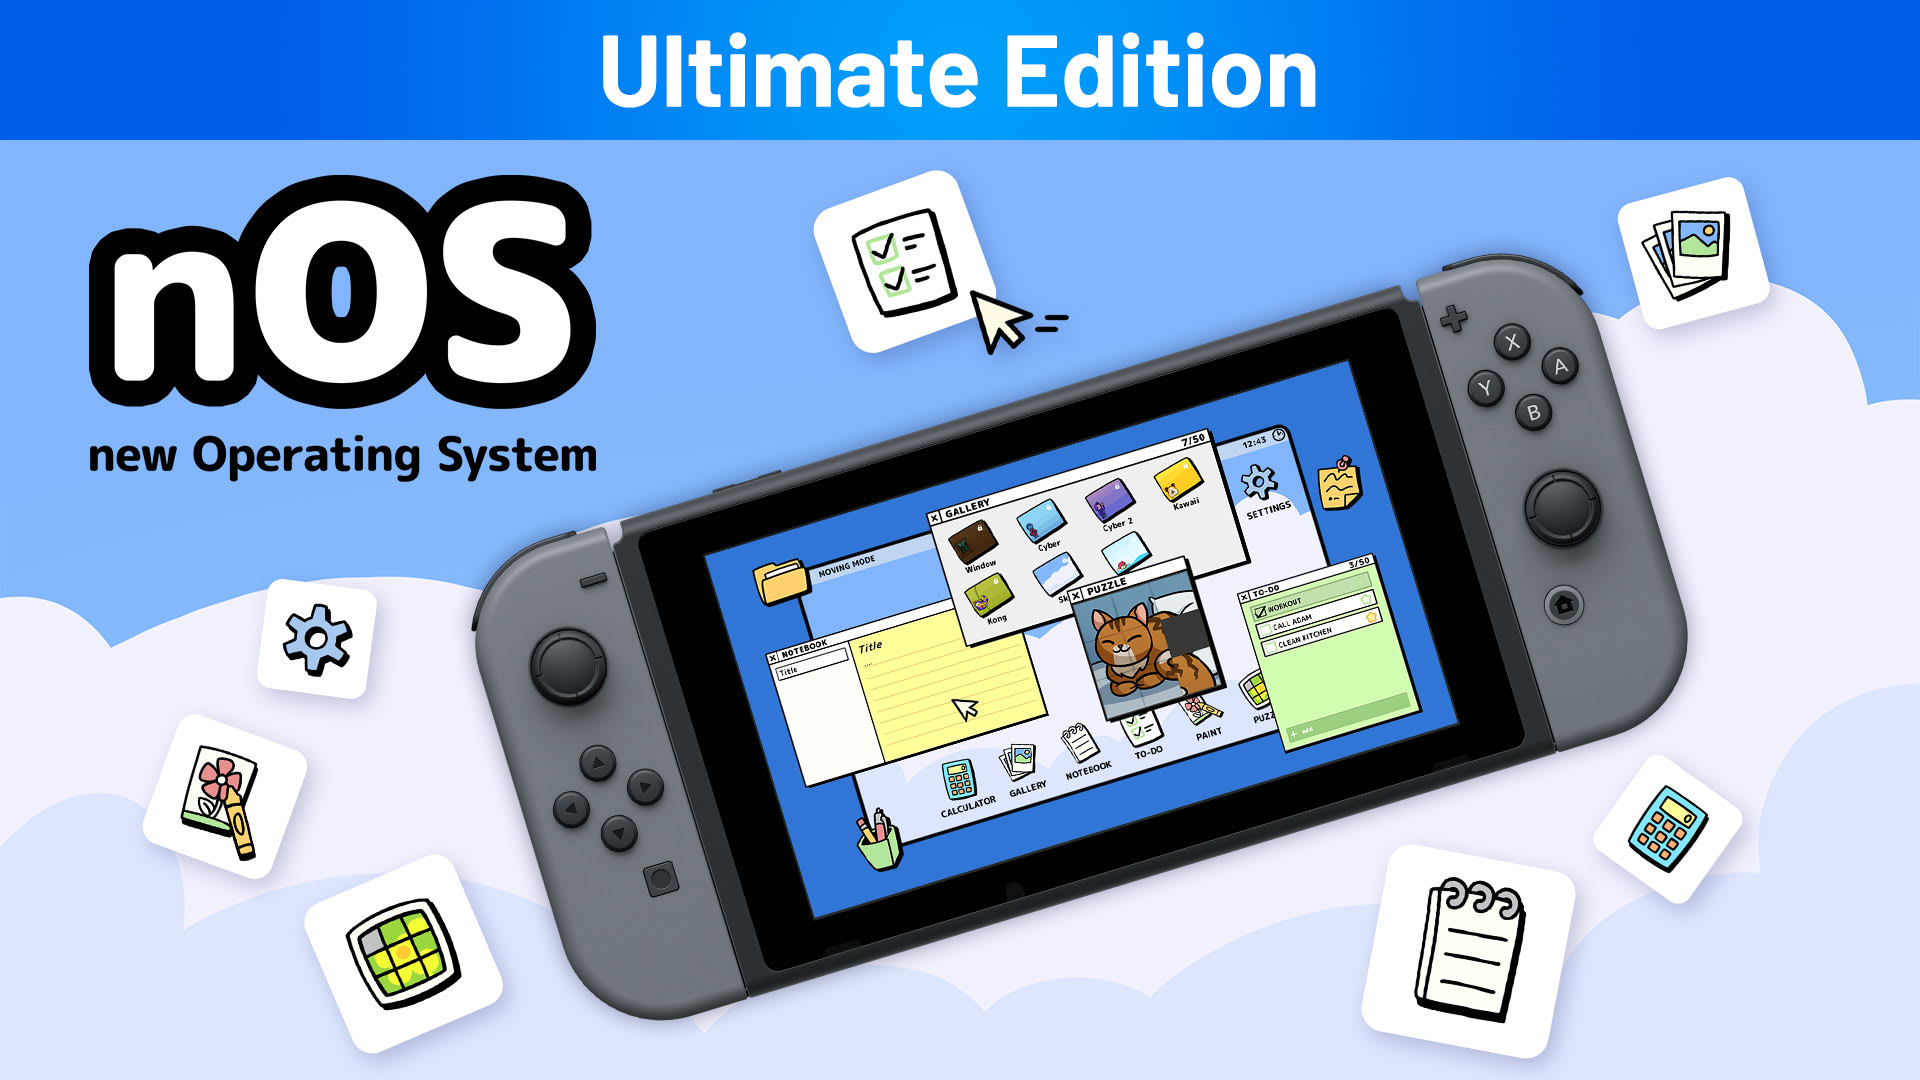 nOS new Operating System Ultimate Edition